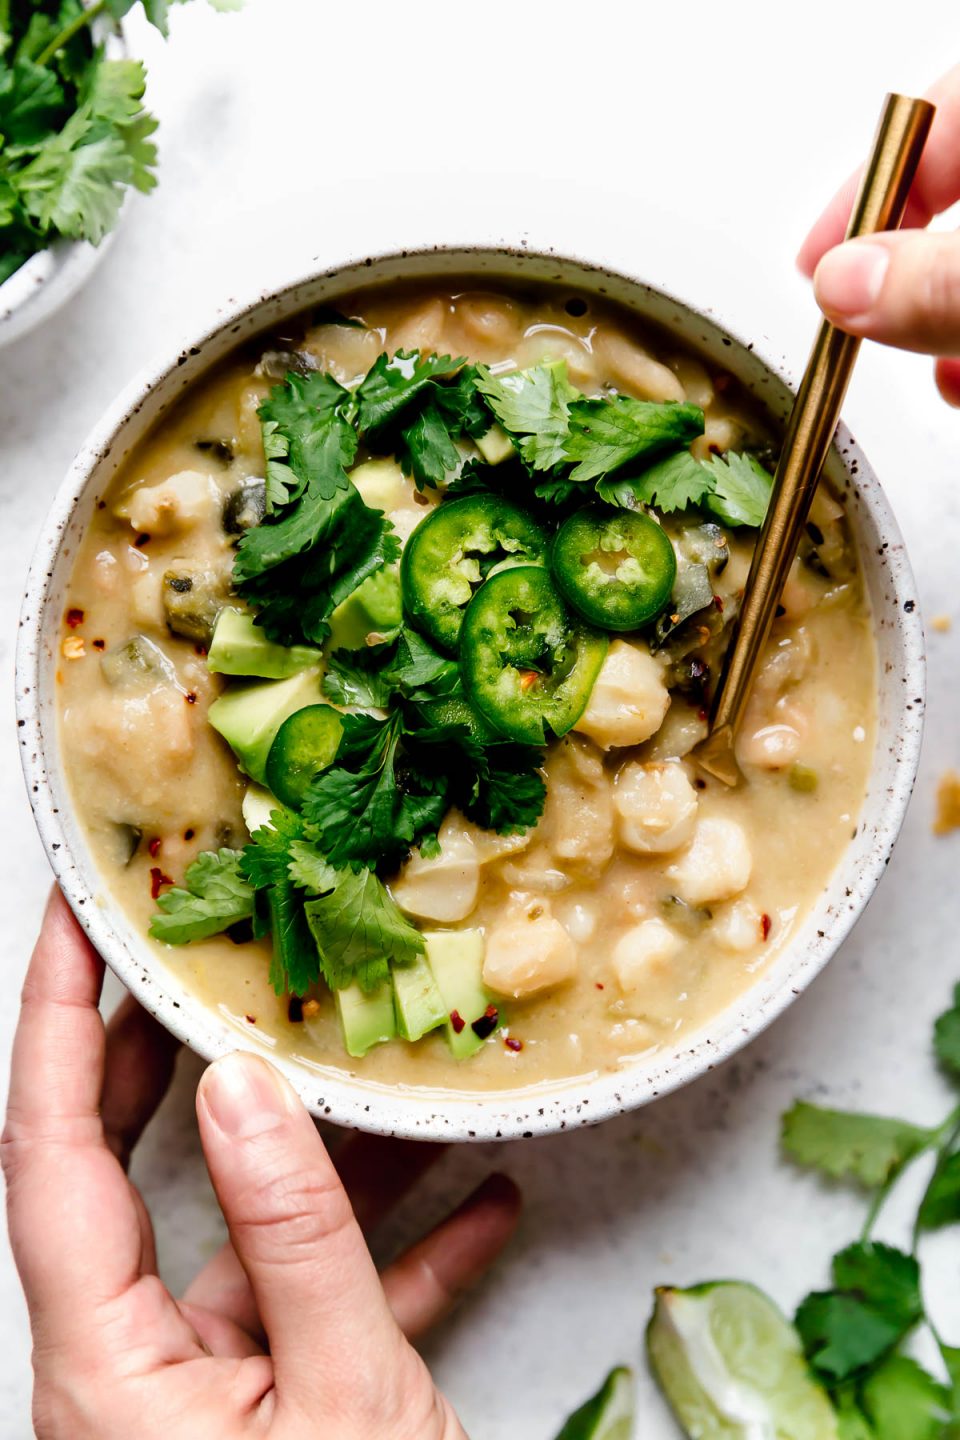 Vegan white chili served in a speckled ceramic bowl, topped with sliced jalapeno, cilantro, & diced avocado. A woman's hands are reaching in, with a large gold spoon, to take a bite of the chili.